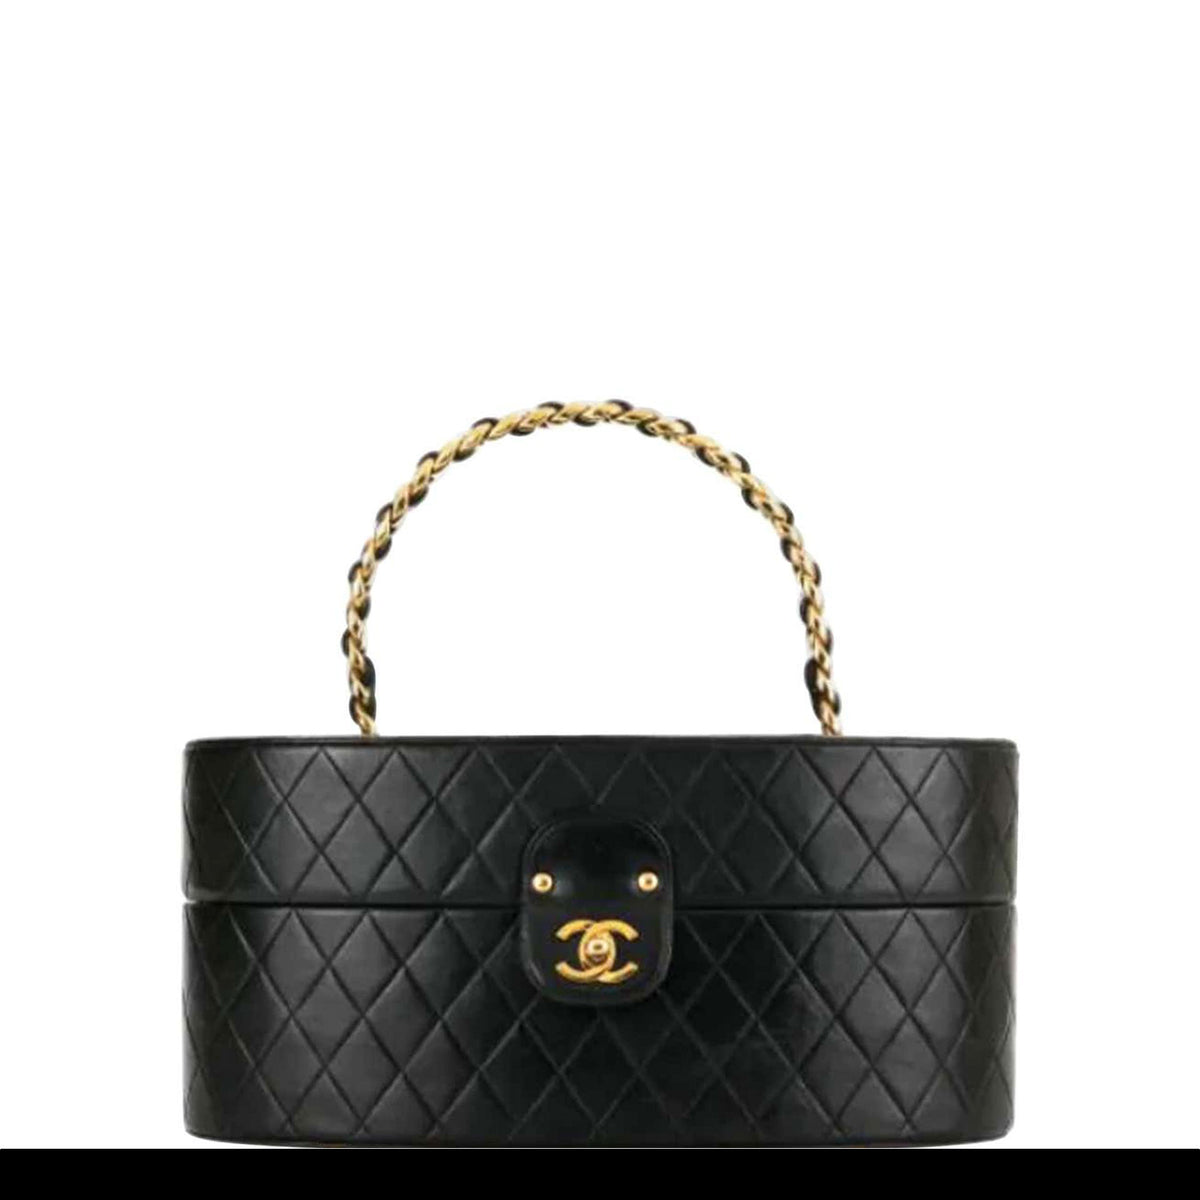 Chanel Vintage 1992 Black Quilted Lambskin Cosmetic Bag Train Case